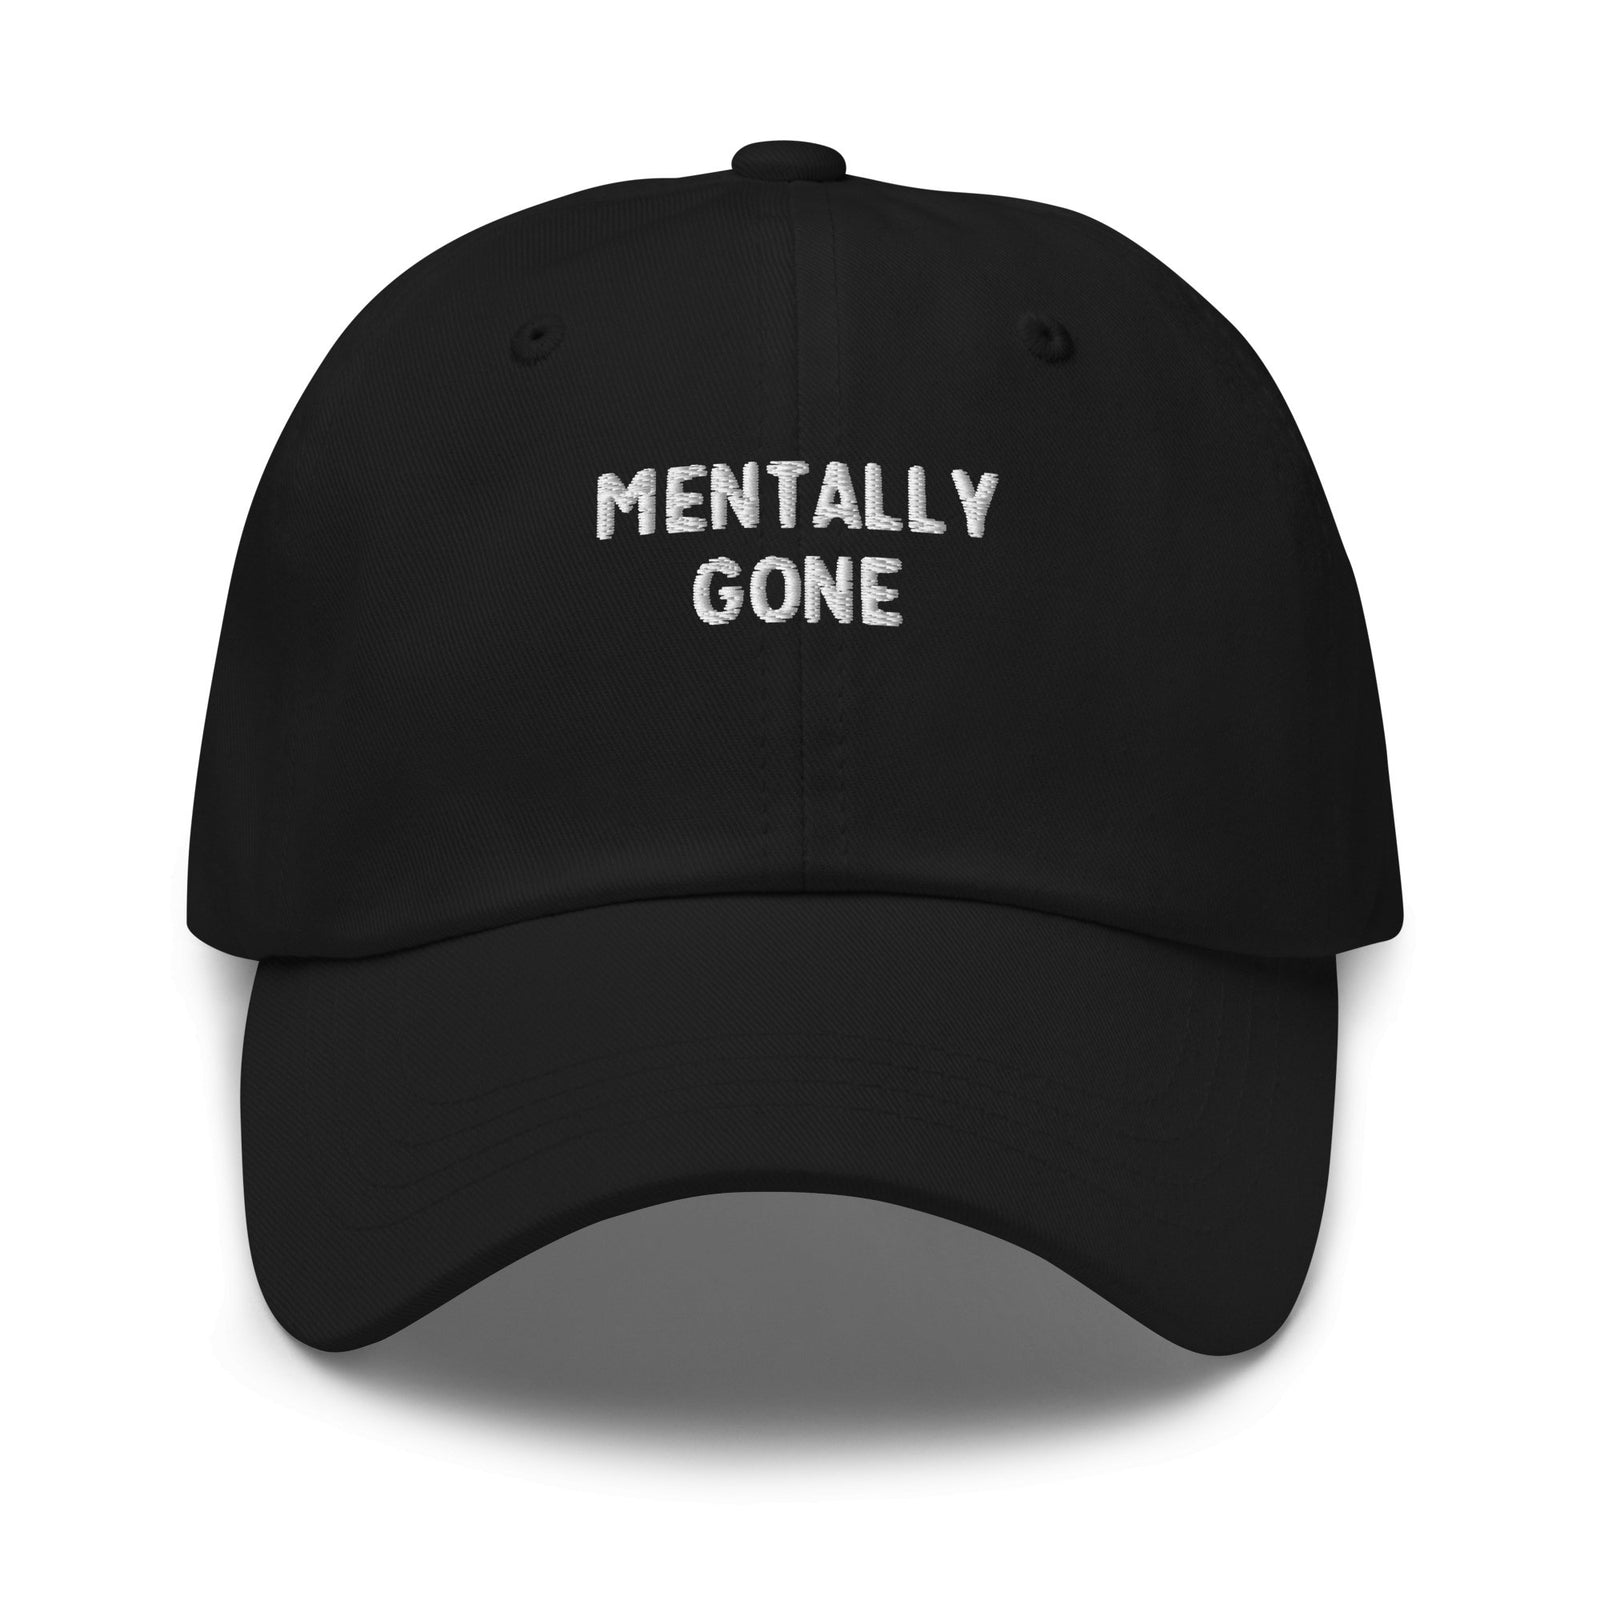 //cdn.shopify.com/s/files/1/0274/2488/2766/products/mentally-gone-dad-hat-821908_5000x.jpg?v=1652422462 5000w,
    //cdn.shopify.com/s/files/1/0274/2488/2766/products/mentally-gone-dad-hat-821908_4500x.jpg?v=1652422462 4500w,
    //cdn.shopify.com/s/files/1/0274/2488/2766/products/mentally-gone-dad-hat-821908_4000x.jpg?v=1652422462 4000w,
    //cdn.shopify.com/s/files/1/0274/2488/2766/products/mentally-gone-dad-hat-821908_3500x.jpg?v=1652422462 3500w,
    //cdn.shopify.com/s/files/1/0274/2488/2766/products/mentally-gone-dad-hat-821908_3000x.jpg?v=1652422462 3000w,
    //cdn.shopify.com/s/files/1/0274/2488/2766/products/mentally-gone-dad-hat-821908_2500x.jpg?v=1652422462 2500w,
    //cdn.shopify.com/s/files/1/0274/2488/2766/products/mentally-gone-dad-hat-821908_2000x.jpg?v=1652422462 2000w,
    //cdn.shopify.com/s/files/1/0274/2488/2766/products/mentally-gone-dad-hat-821908_1800x.jpg?v=1652422462 1800w,
    //cdn.shopify.com/s/files/1/0274/2488/2766/products/mentally-gone-dad-hat-821908_1600x.jpg?v=1652422462 1600w,
    //cdn.shopify.com/s/files/1/0274/2488/2766/products/mentally-gone-dad-hat-821908_1400x.jpg?v=1652422462 1400w,
    //cdn.shopify.com/s/files/1/0274/2488/2766/products/mentally-gone-dad-hat-821908_1200x.jpg?v=1652422462 1200w,
    //cdn.shopify.com/s/files/1/0274/2488/2766/products/mentally-gone-dad-hat-821908_1000x.jpg?v=1652422462 1000w,
    //cdn.shopify.com/s/files/1/0274/2488/2766/products/mentally-gone-dad-hat-821908_800x.jpg?v=1652422462 800w,
    //cdn.shopify.com/s/files/1/0274/2488/2766/products/mentally-gone-dad-hat-821908_600x.jpg?v=1652422462 600w,
    //cdn.shopify.com/s/files/1/0274/2488/2766/products/mentally-gone-dad-hat-821908_400x.jpg?v=1652422462 400w,
    //cdn.shopify.com/s/files/1/0274/2488/2766/products/mentally-gone-dad-hat-821908_200x.jpg?v=1652422462 200w